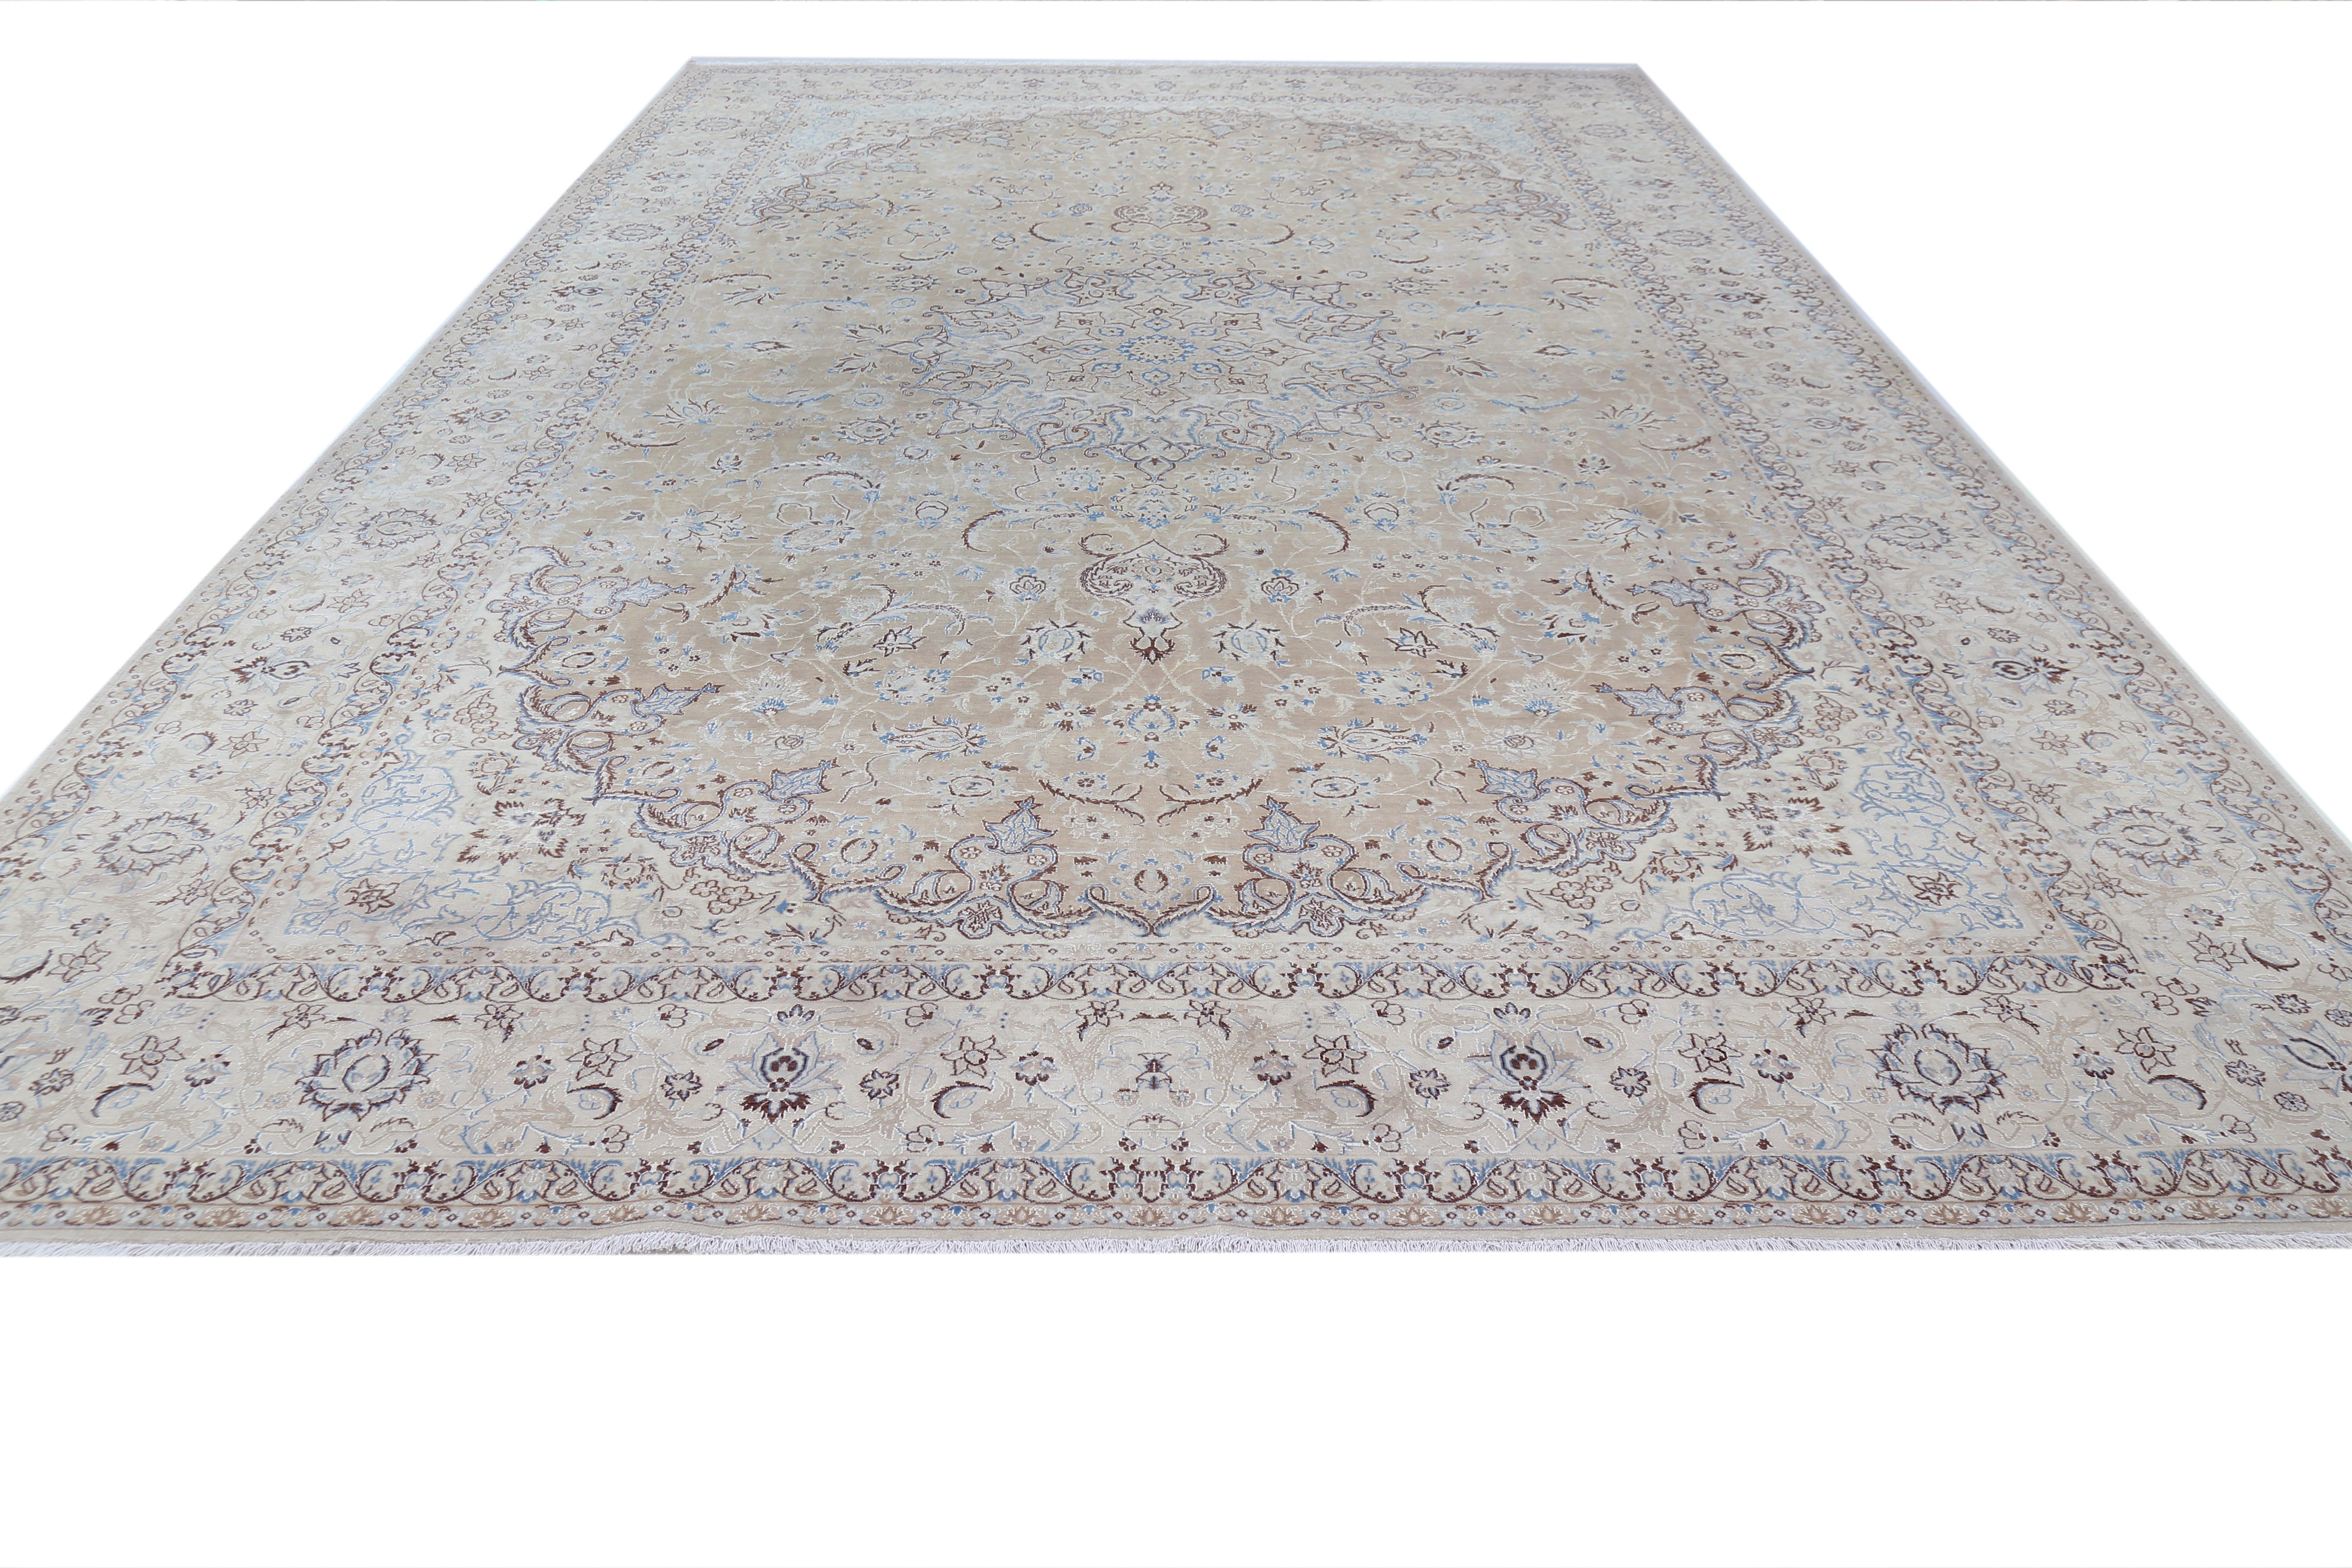 A stunning Persian Semi Antique Nain Rug originated from Iran in the late 20th century. This beautiful rug is 100% hand-knotted and in excellent condition. 